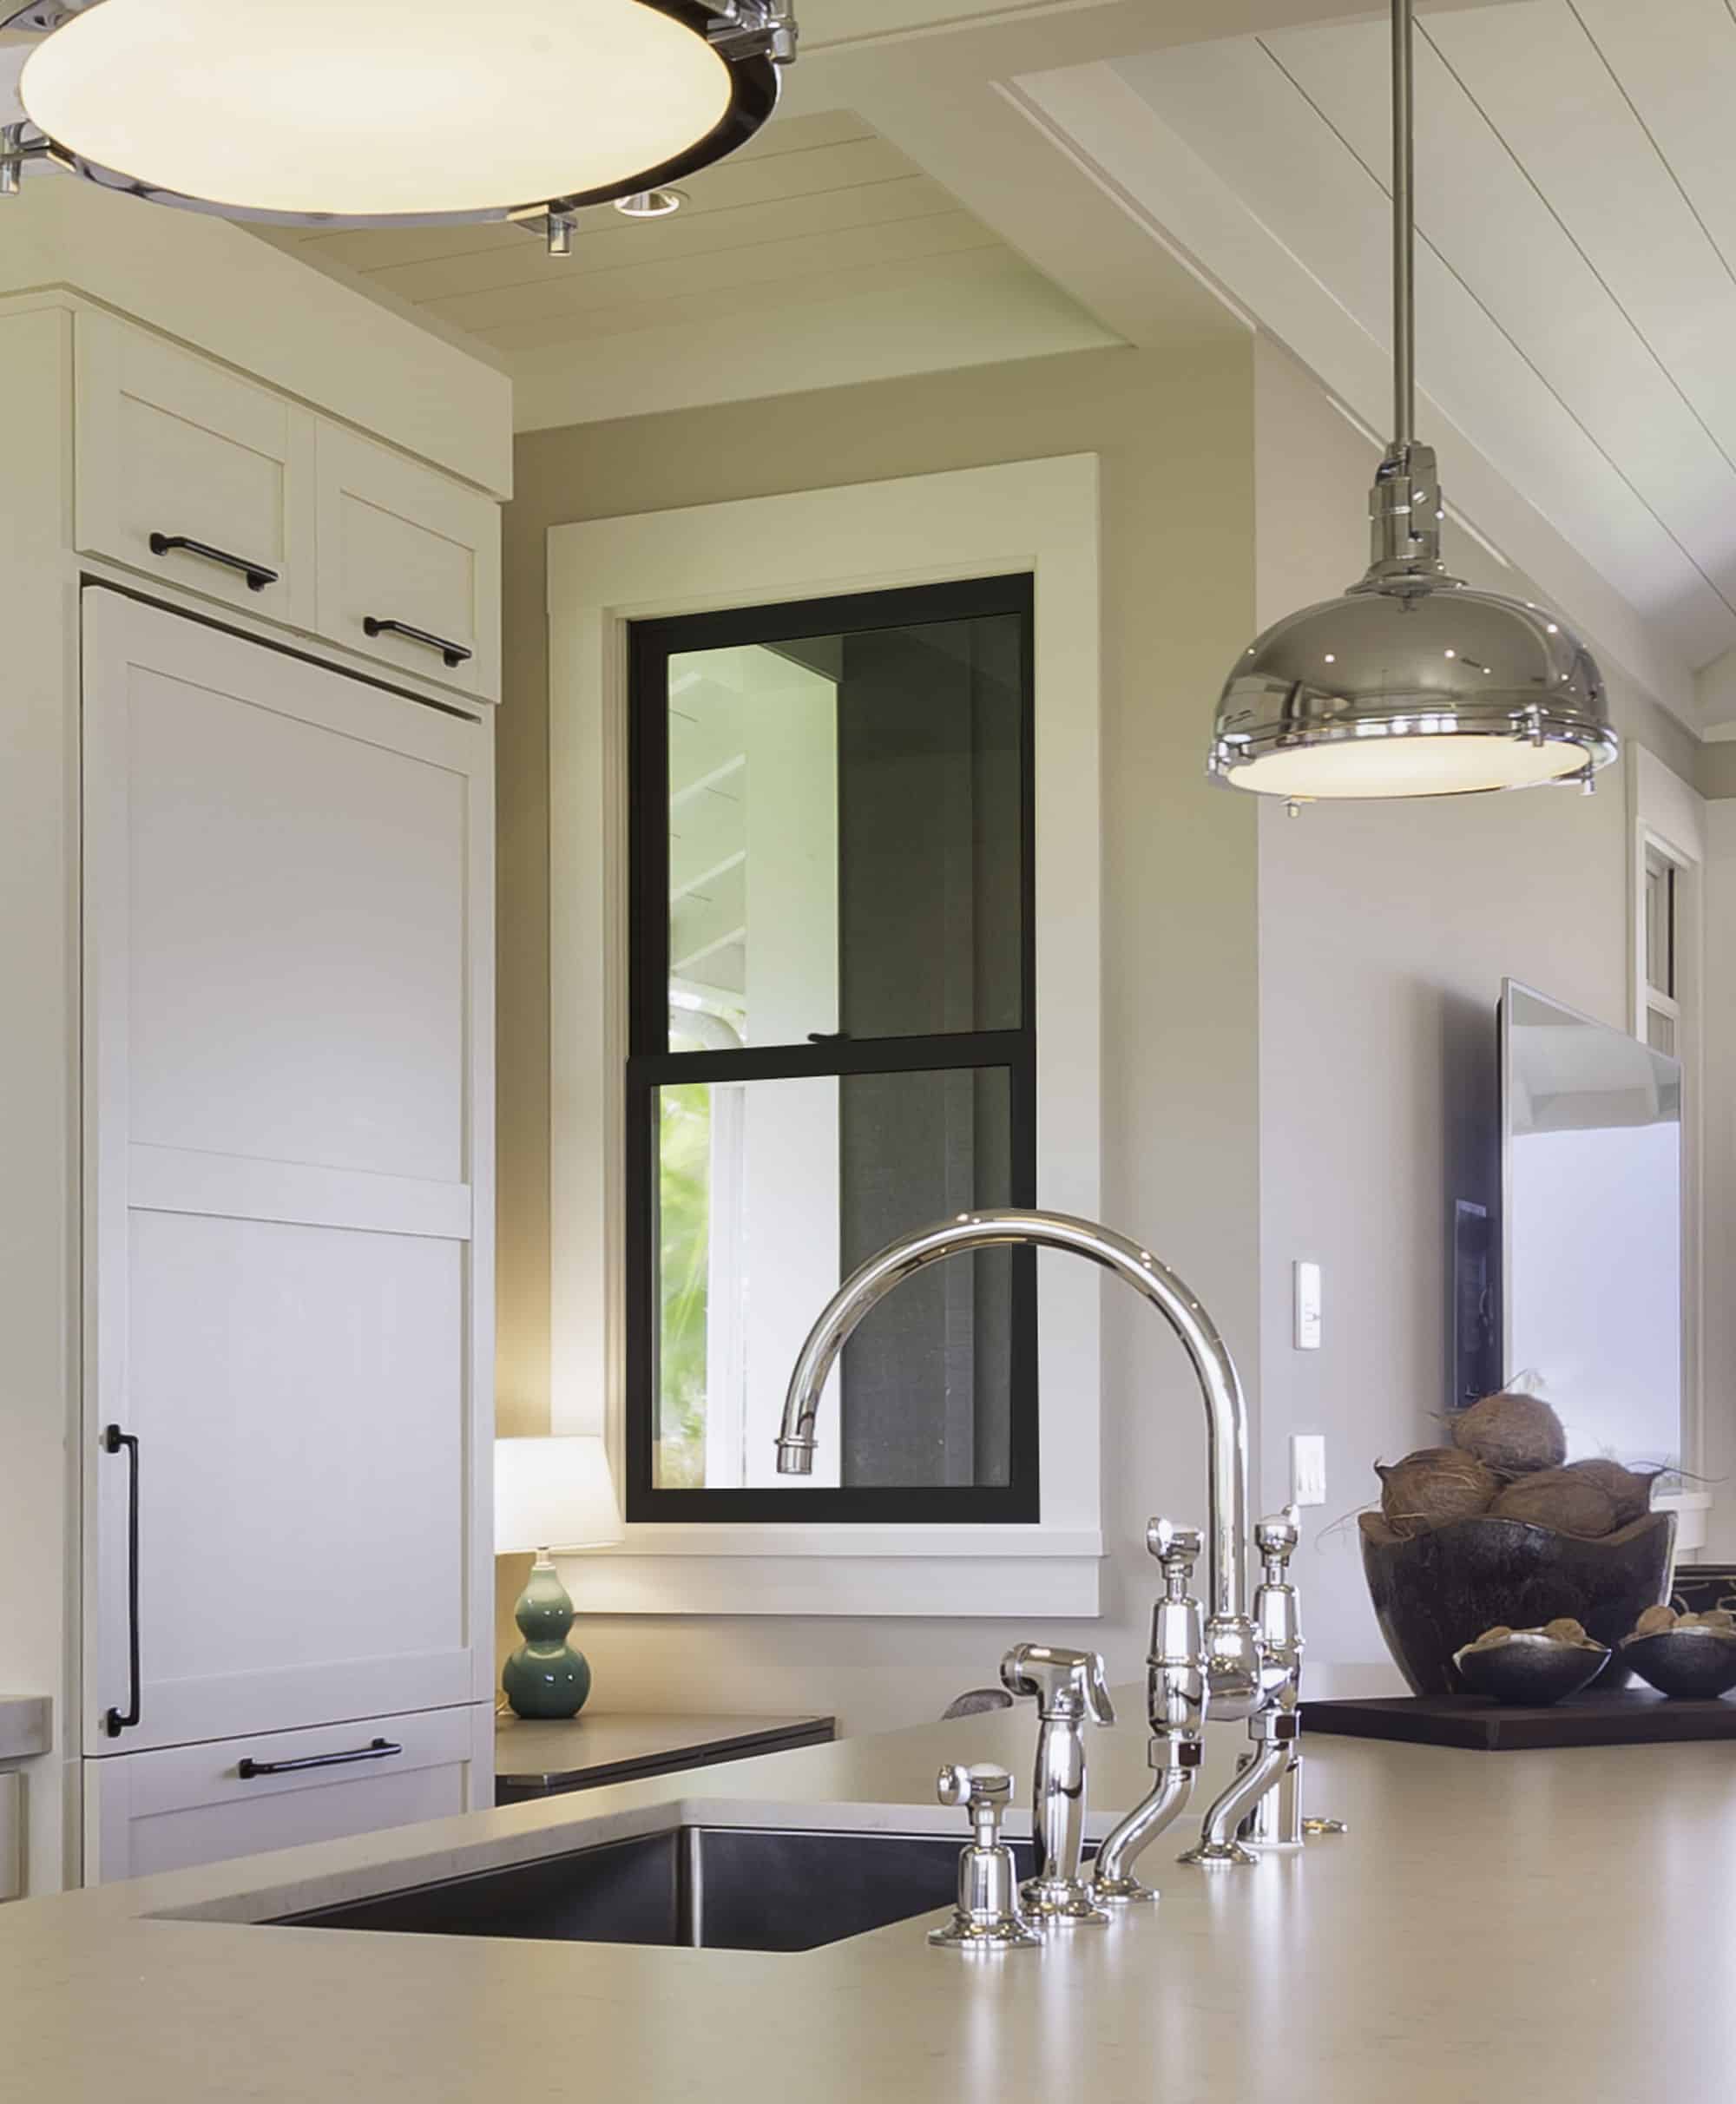 A single-hung window in a kitchen.